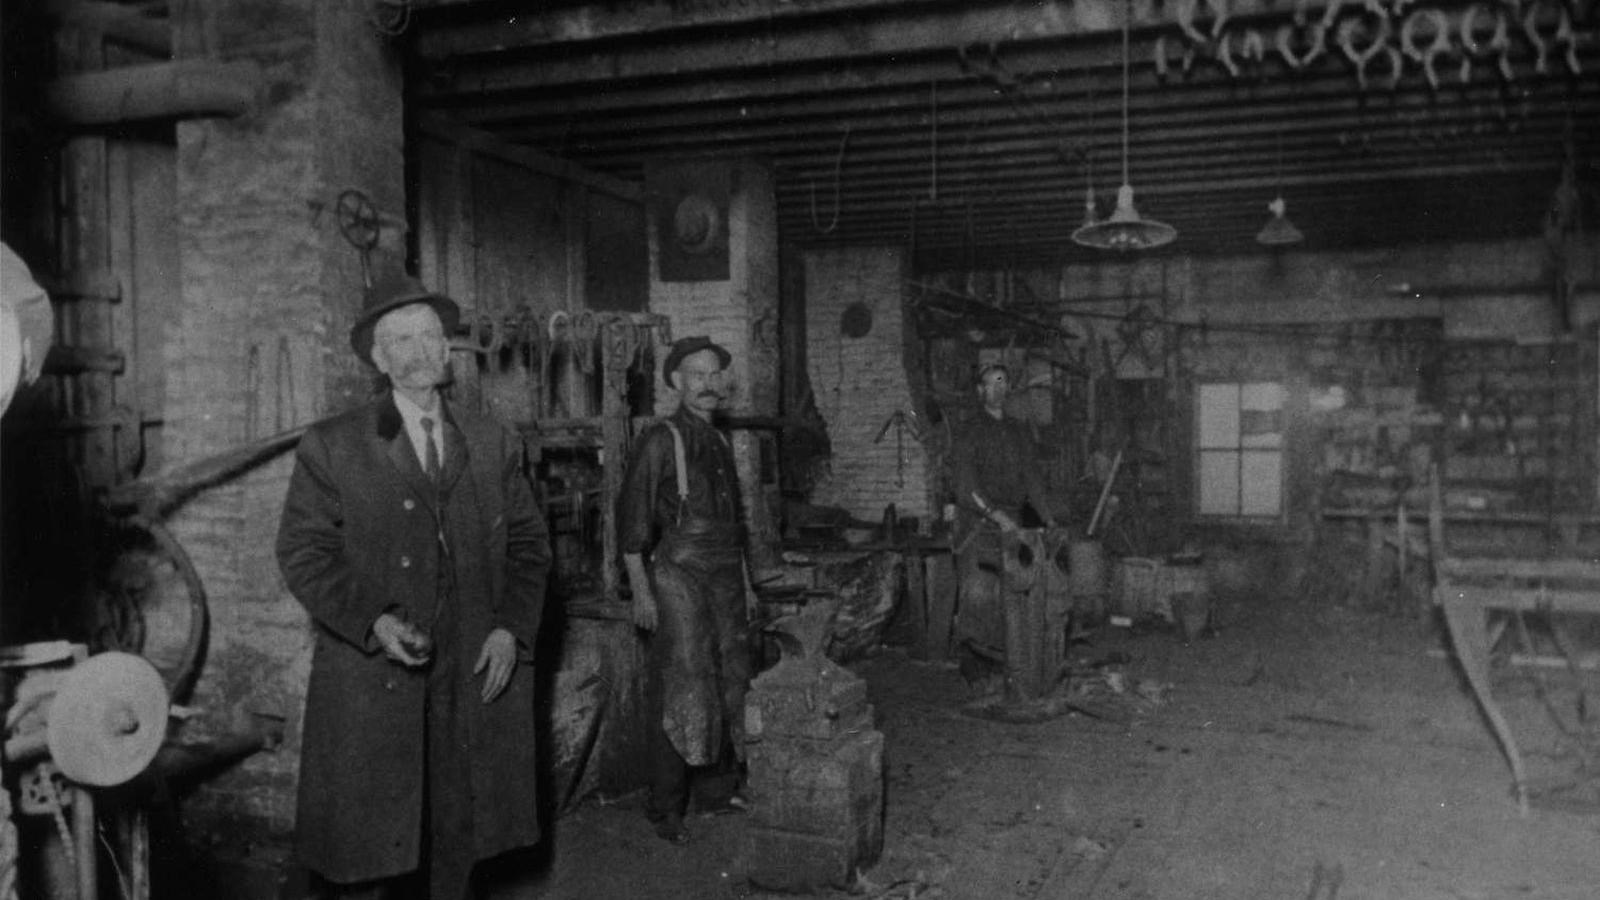 A man in a suit and coat stands in the foreground of a blacksmith shop floor. 